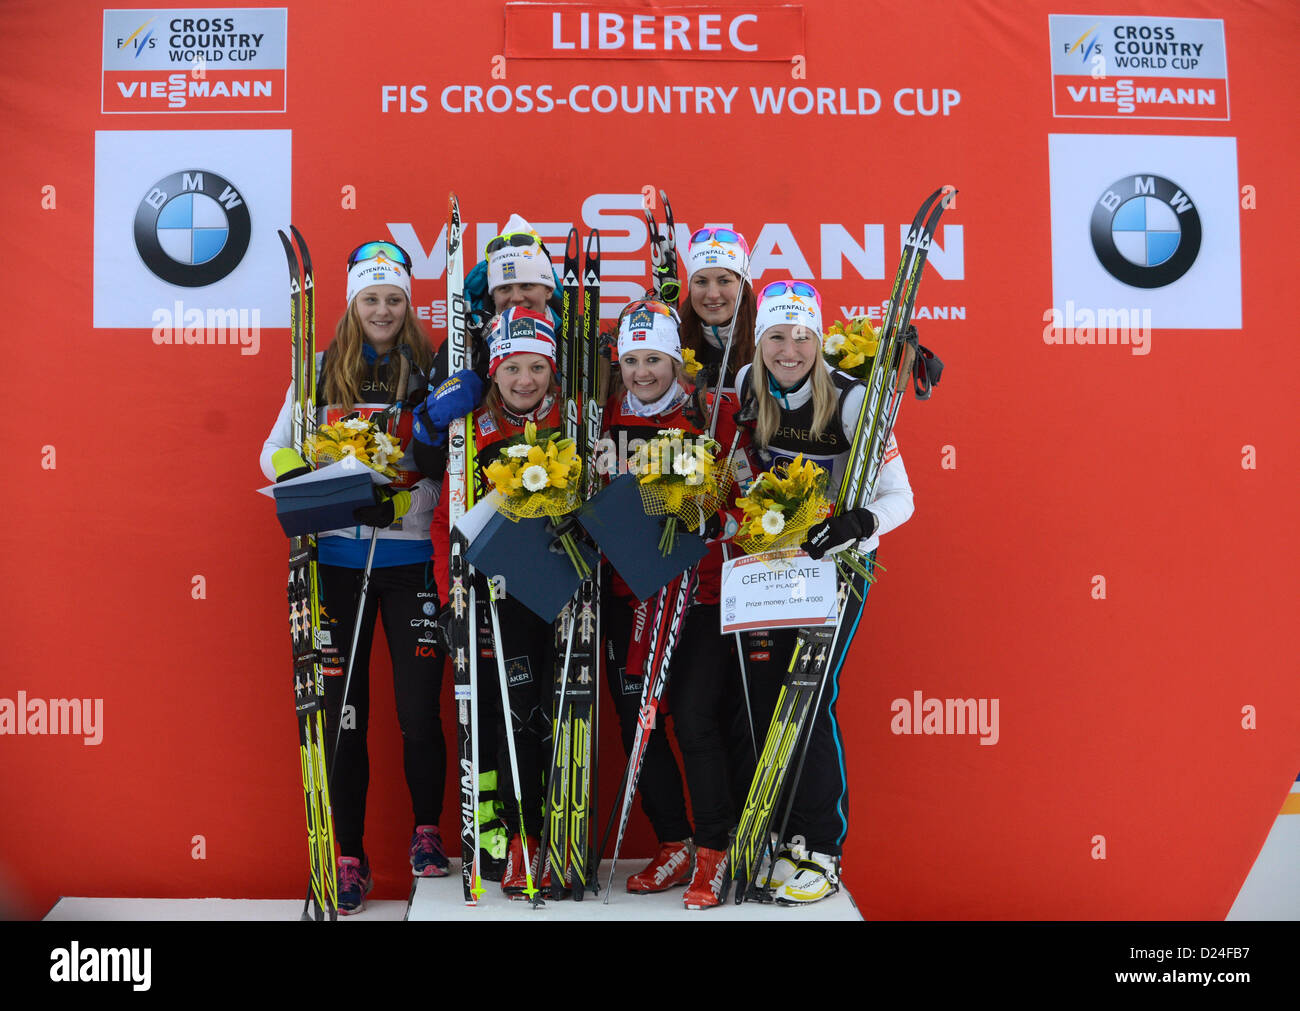 From left: second placed Stina Nilsson and Ida Ingemarsdotter from Sweden, first placed Norwegian skier Maiken Caspersen Falla and Ingvild Flugstad Ostberg, third placed Linn Somskar and Magdalena Pajala from Sweden are celebrating victory after the women´s team race of FIS Cross-Country Skiing World Cup 2012-13 in Liberec, Czech Republic, January 13, 2013. (CTK Photo/Michal Kamaryt) Stock Photo